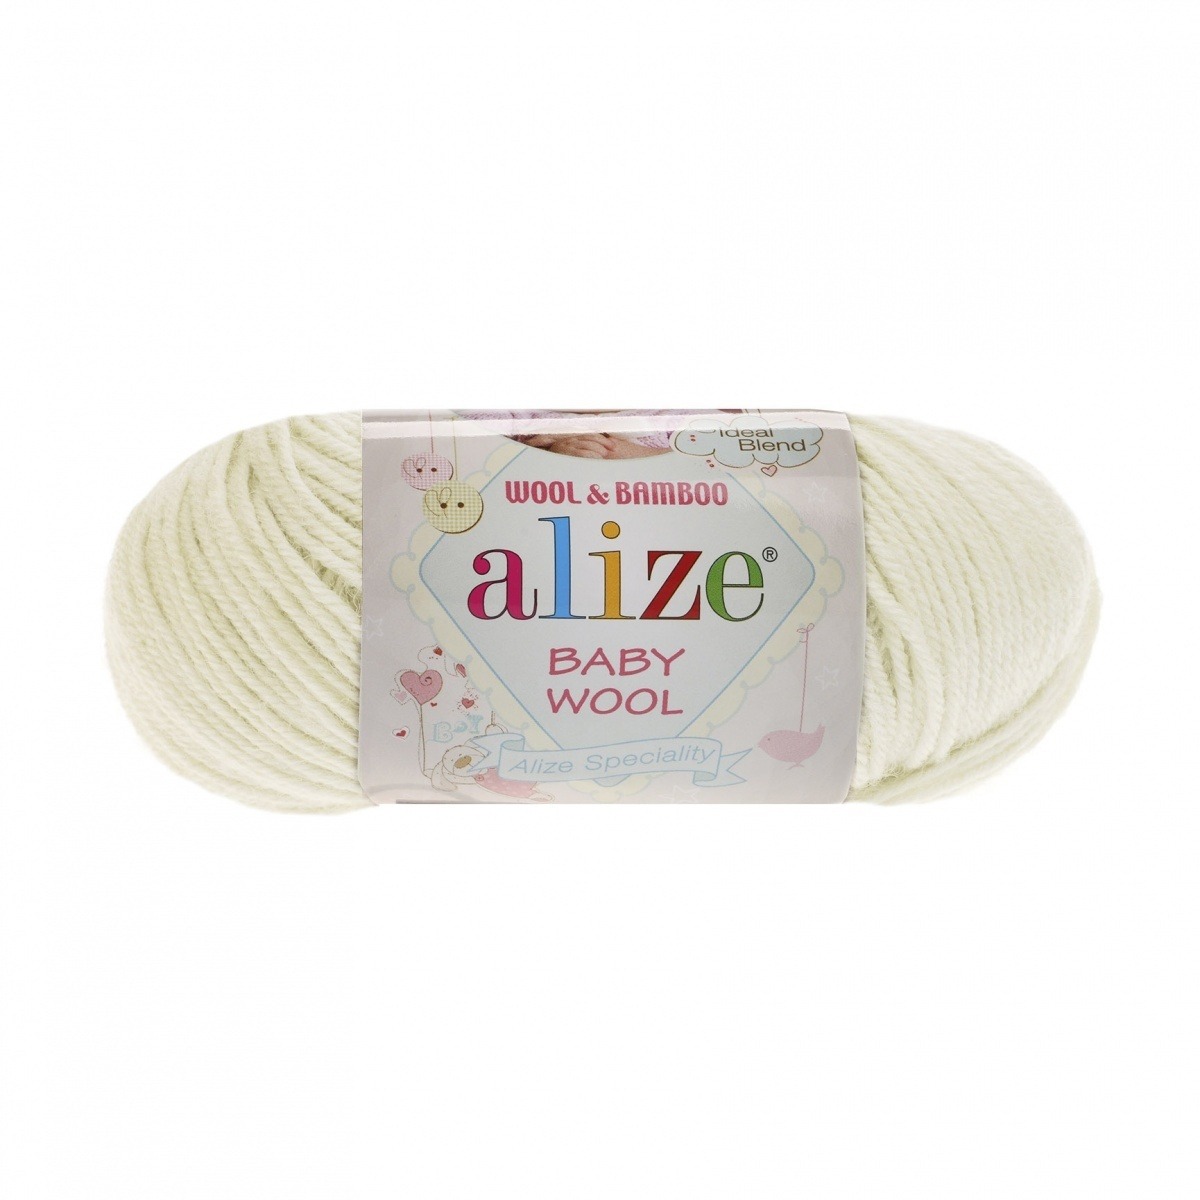 Alize "Baby wool" (599)